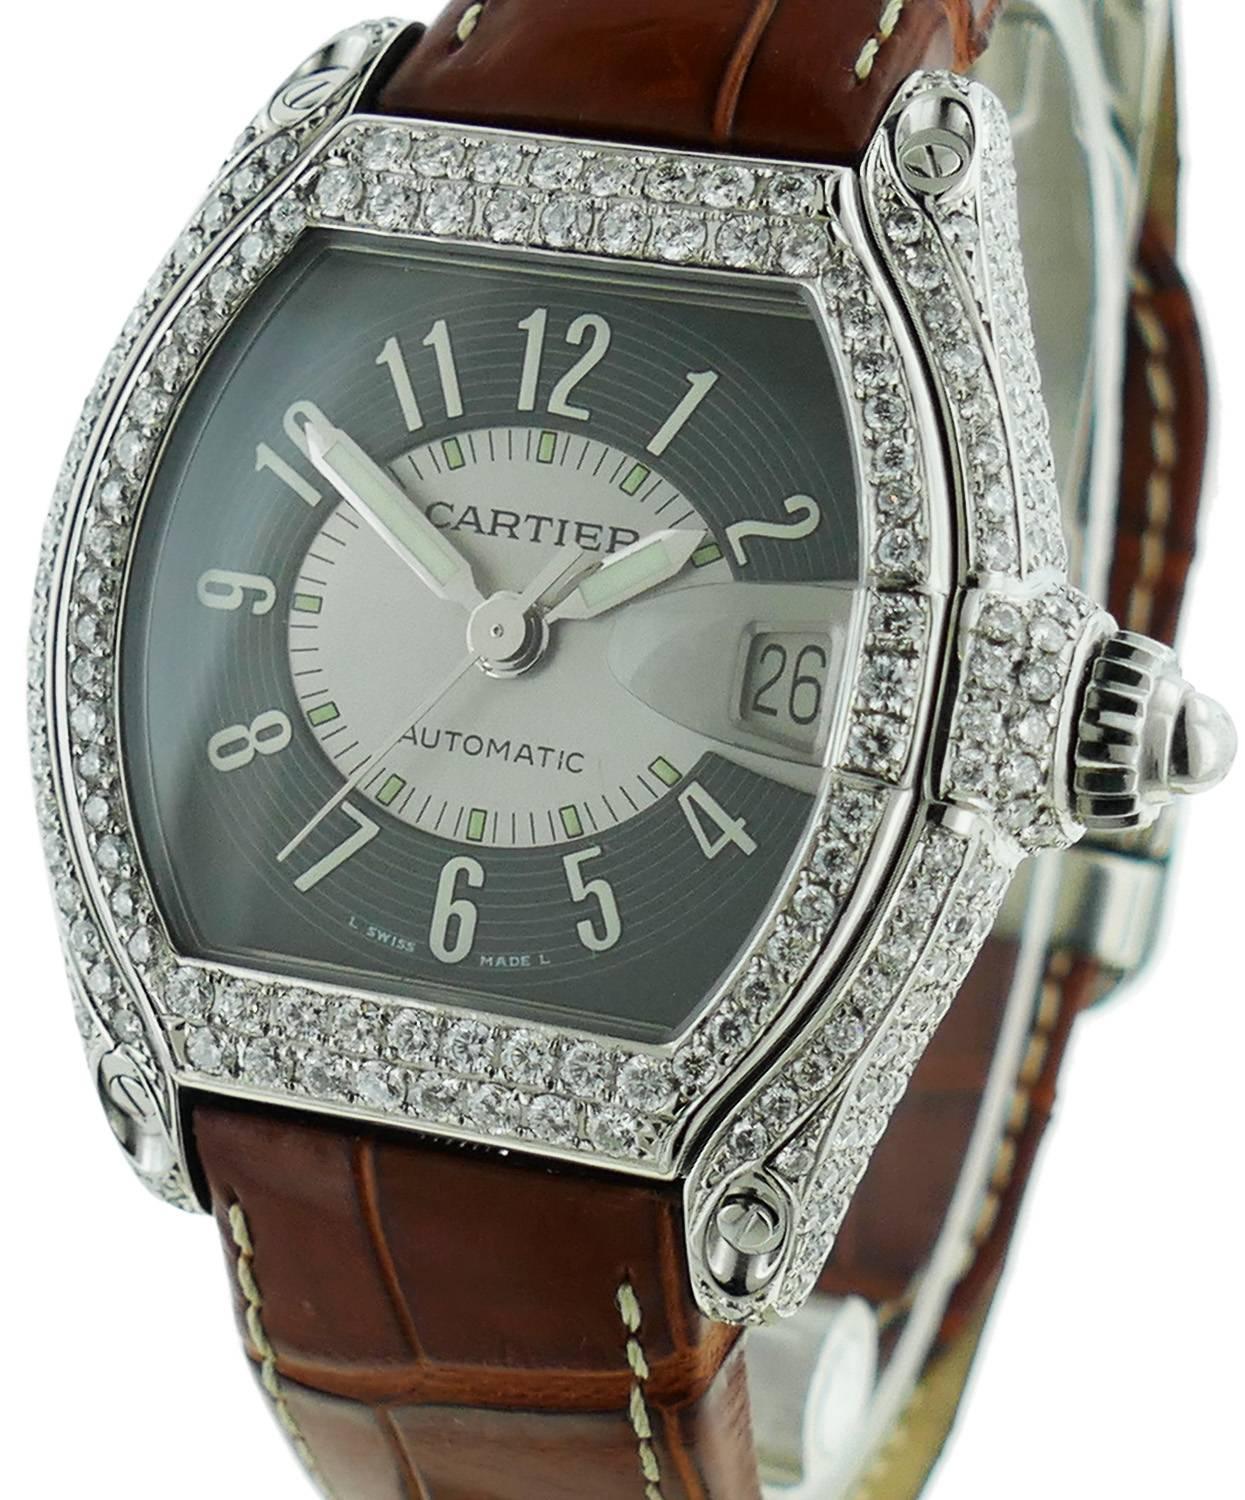 Mens 38mm Cartier Roadster Stainless Steel Watch W/ Good Quality Custom Set Diamonds All Over the Case. Watch Movement is Powered by Automatic Mechanical Winding.